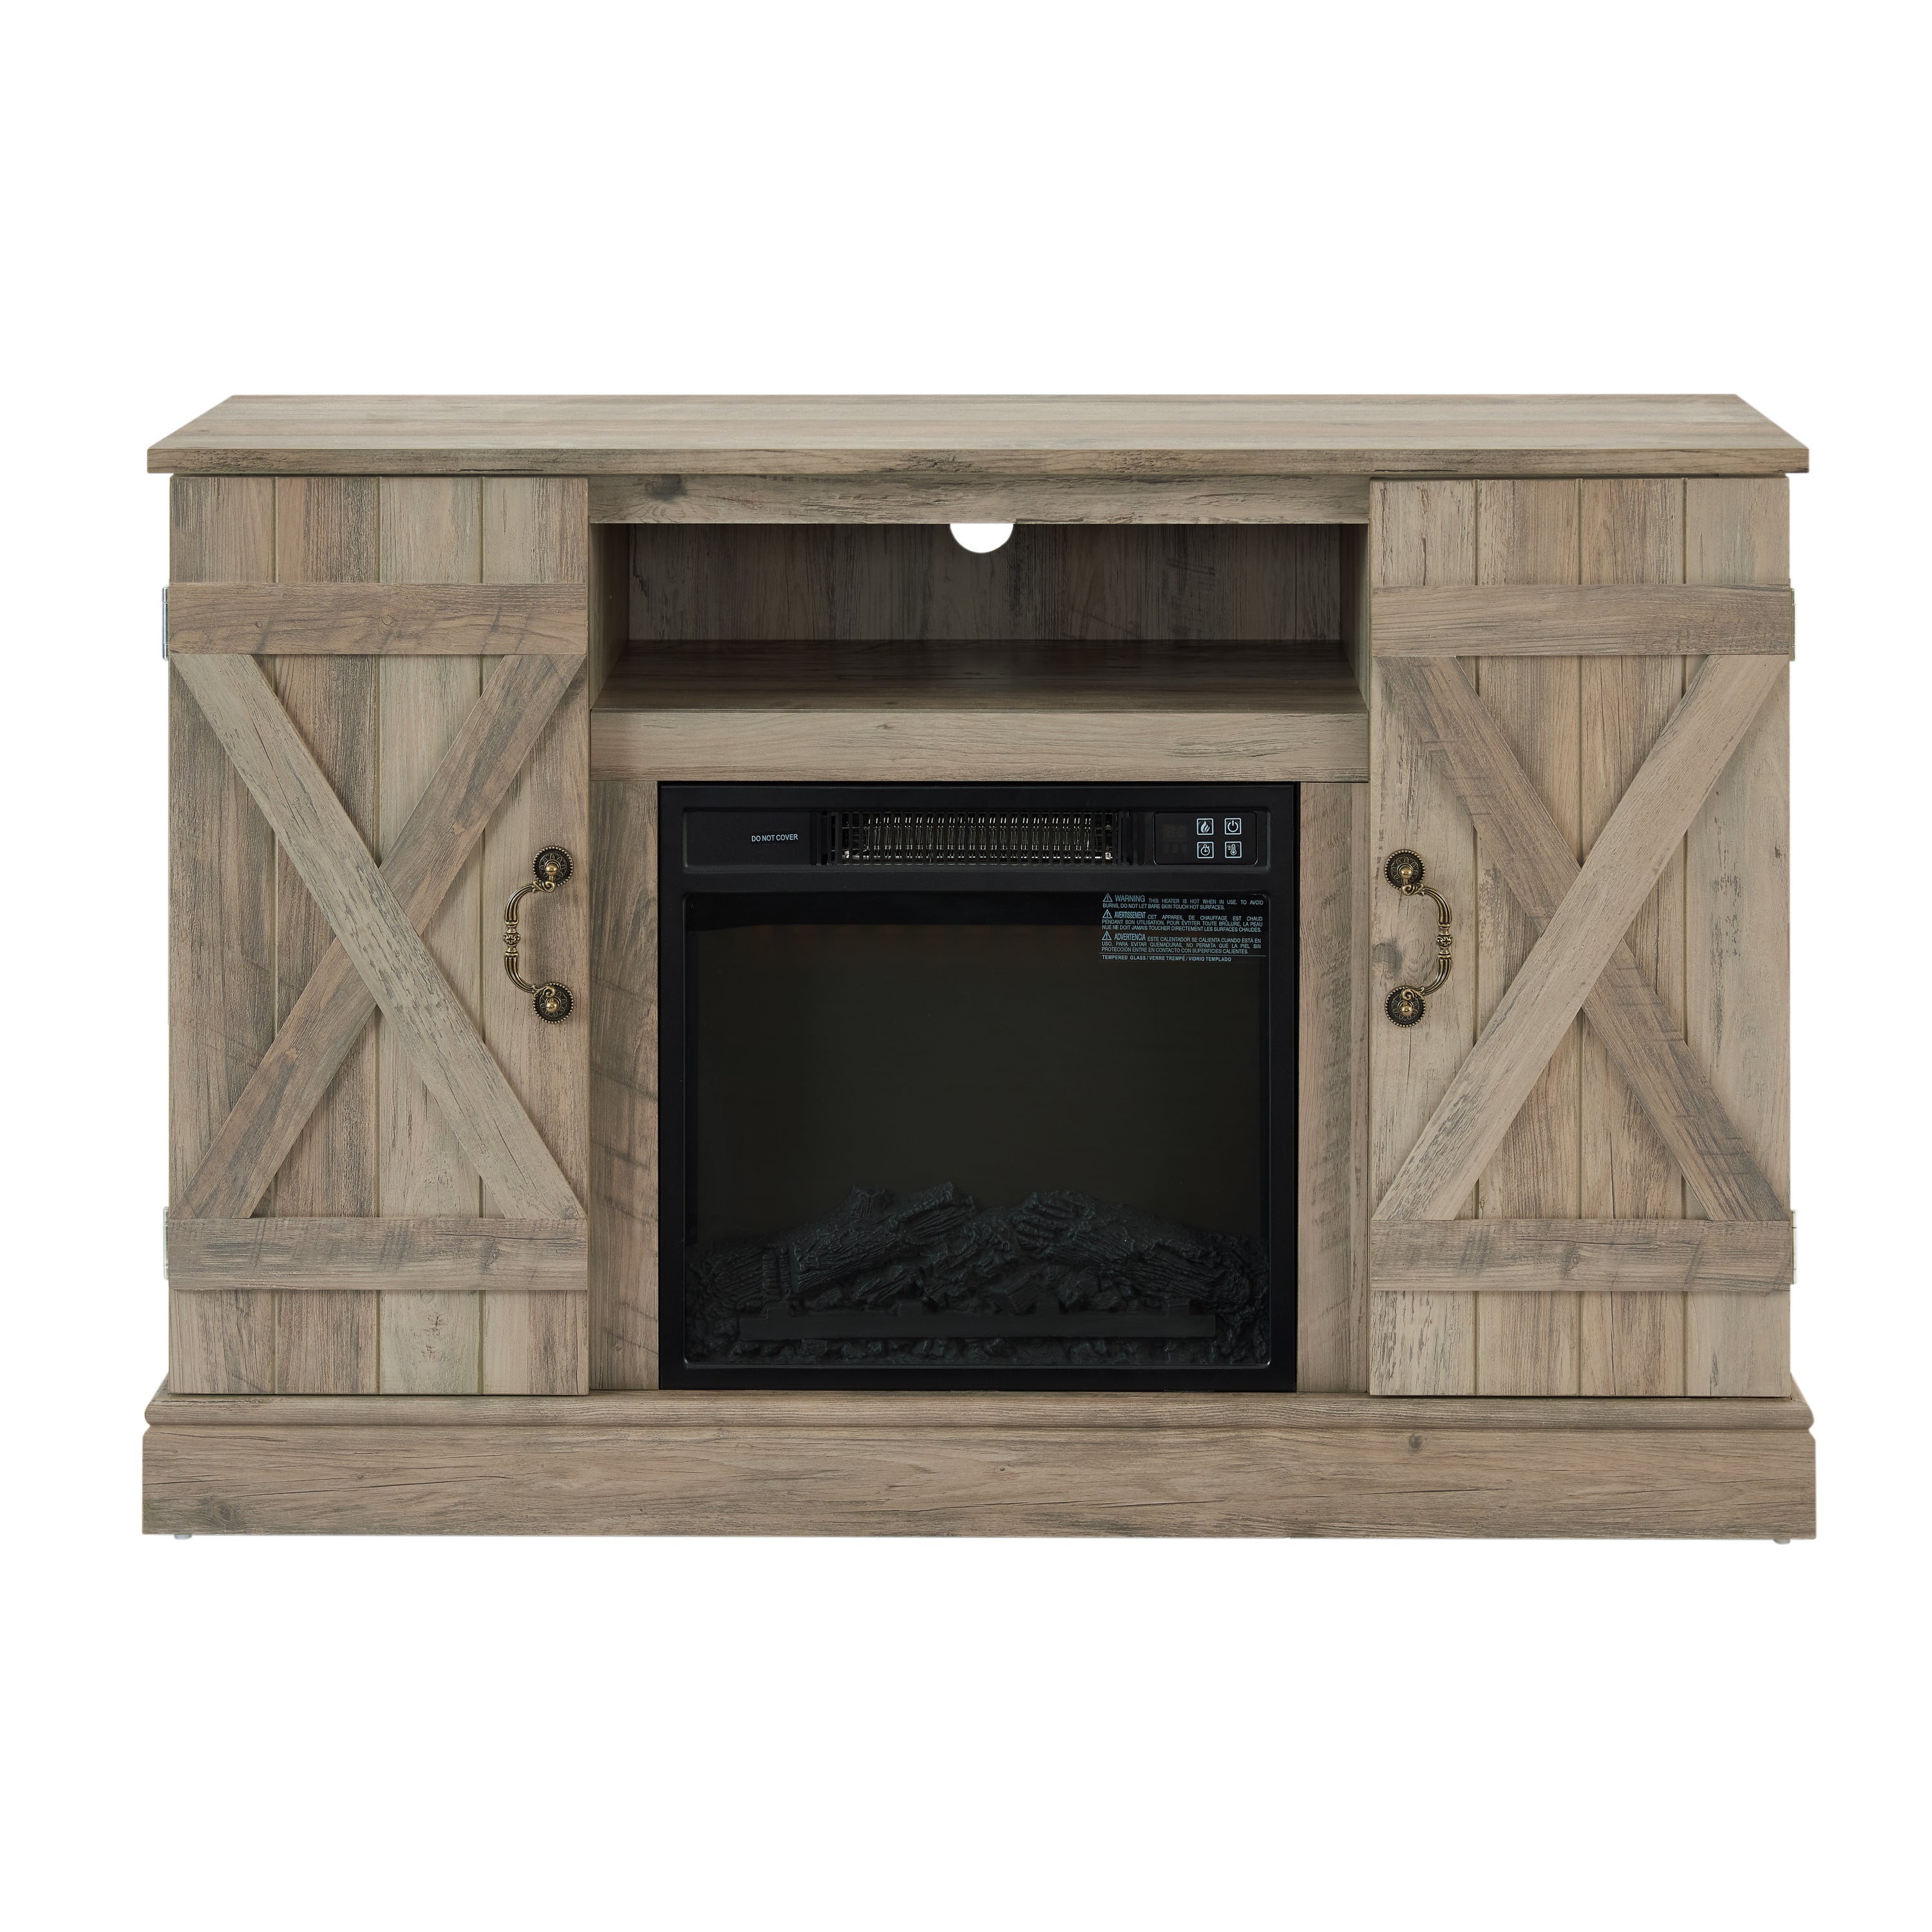 Farmhouse Classic Media TV Stand with 18" Electric Fireplace Insert for TV up to 50" with Open and Closed Storage Space, Gray Wash